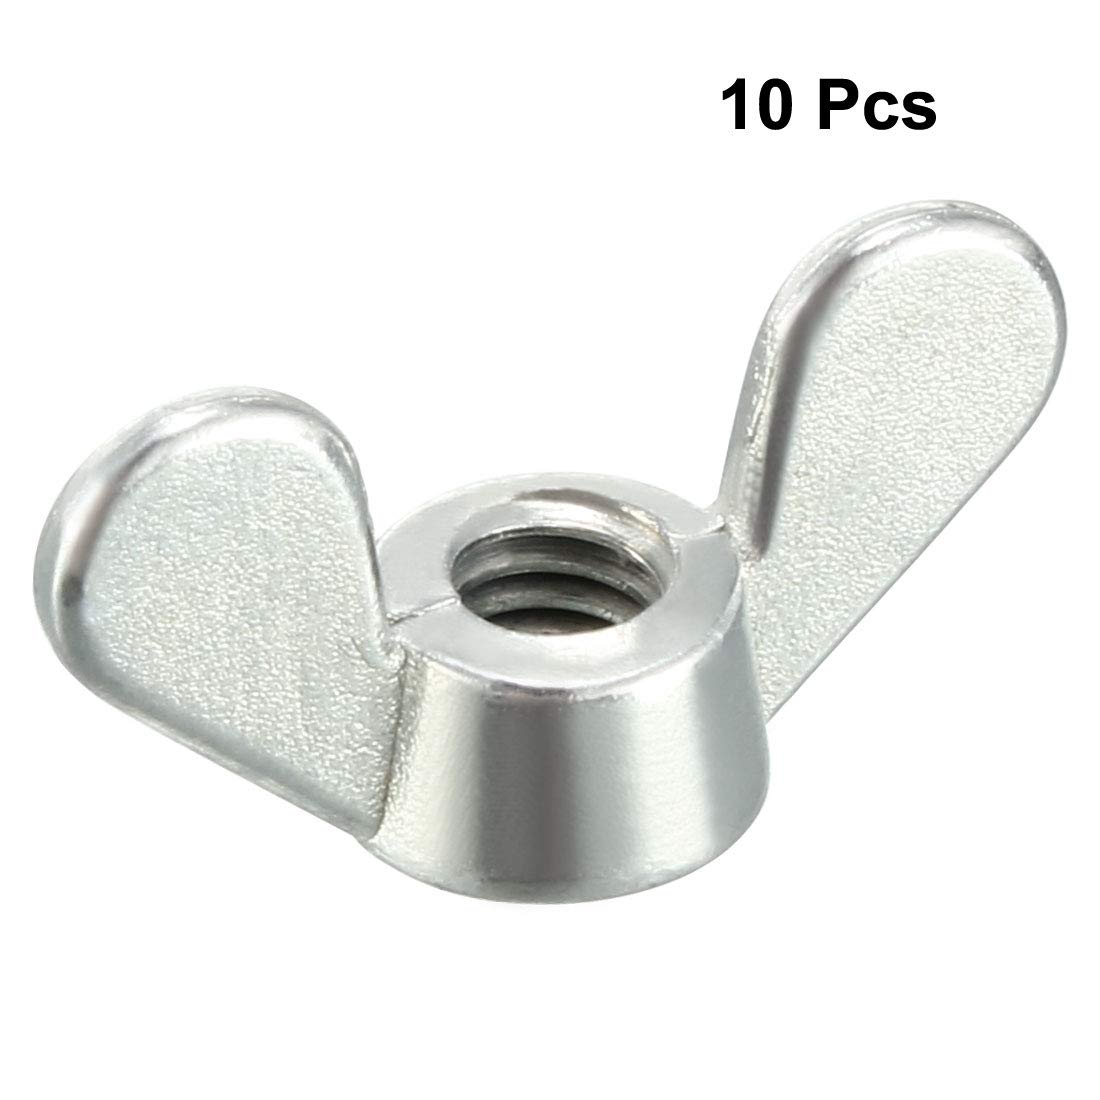 Pack of 10 M4 Wing Nuts for 3D Printer Bed Adjustment